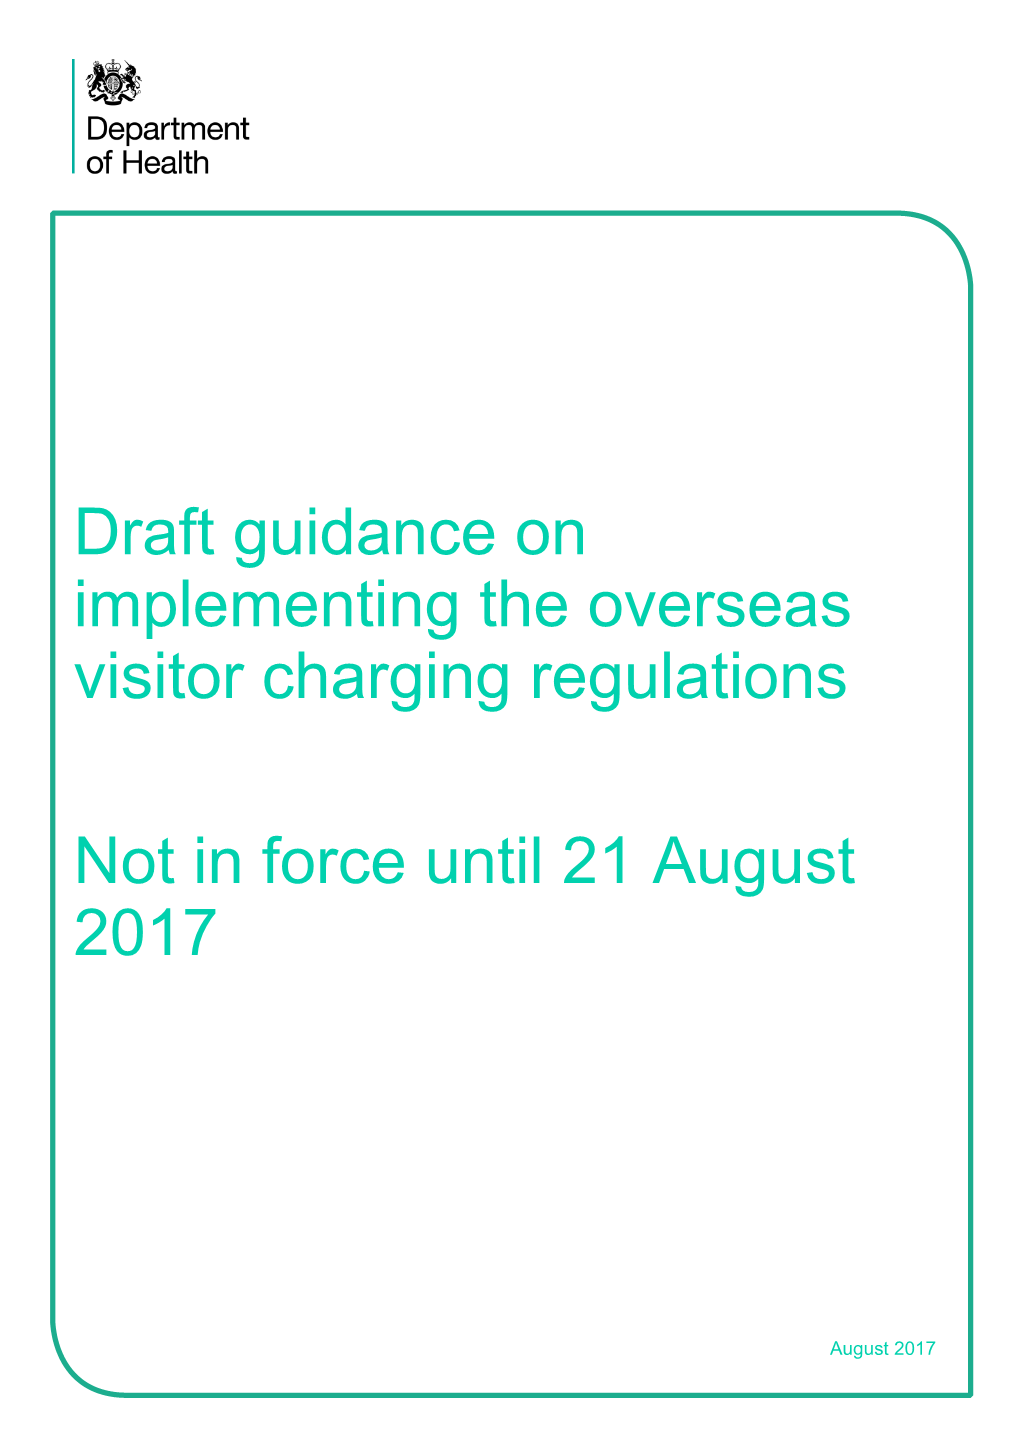 Draft Guidance on Implementing the Overseas Visitor Charging Regulations